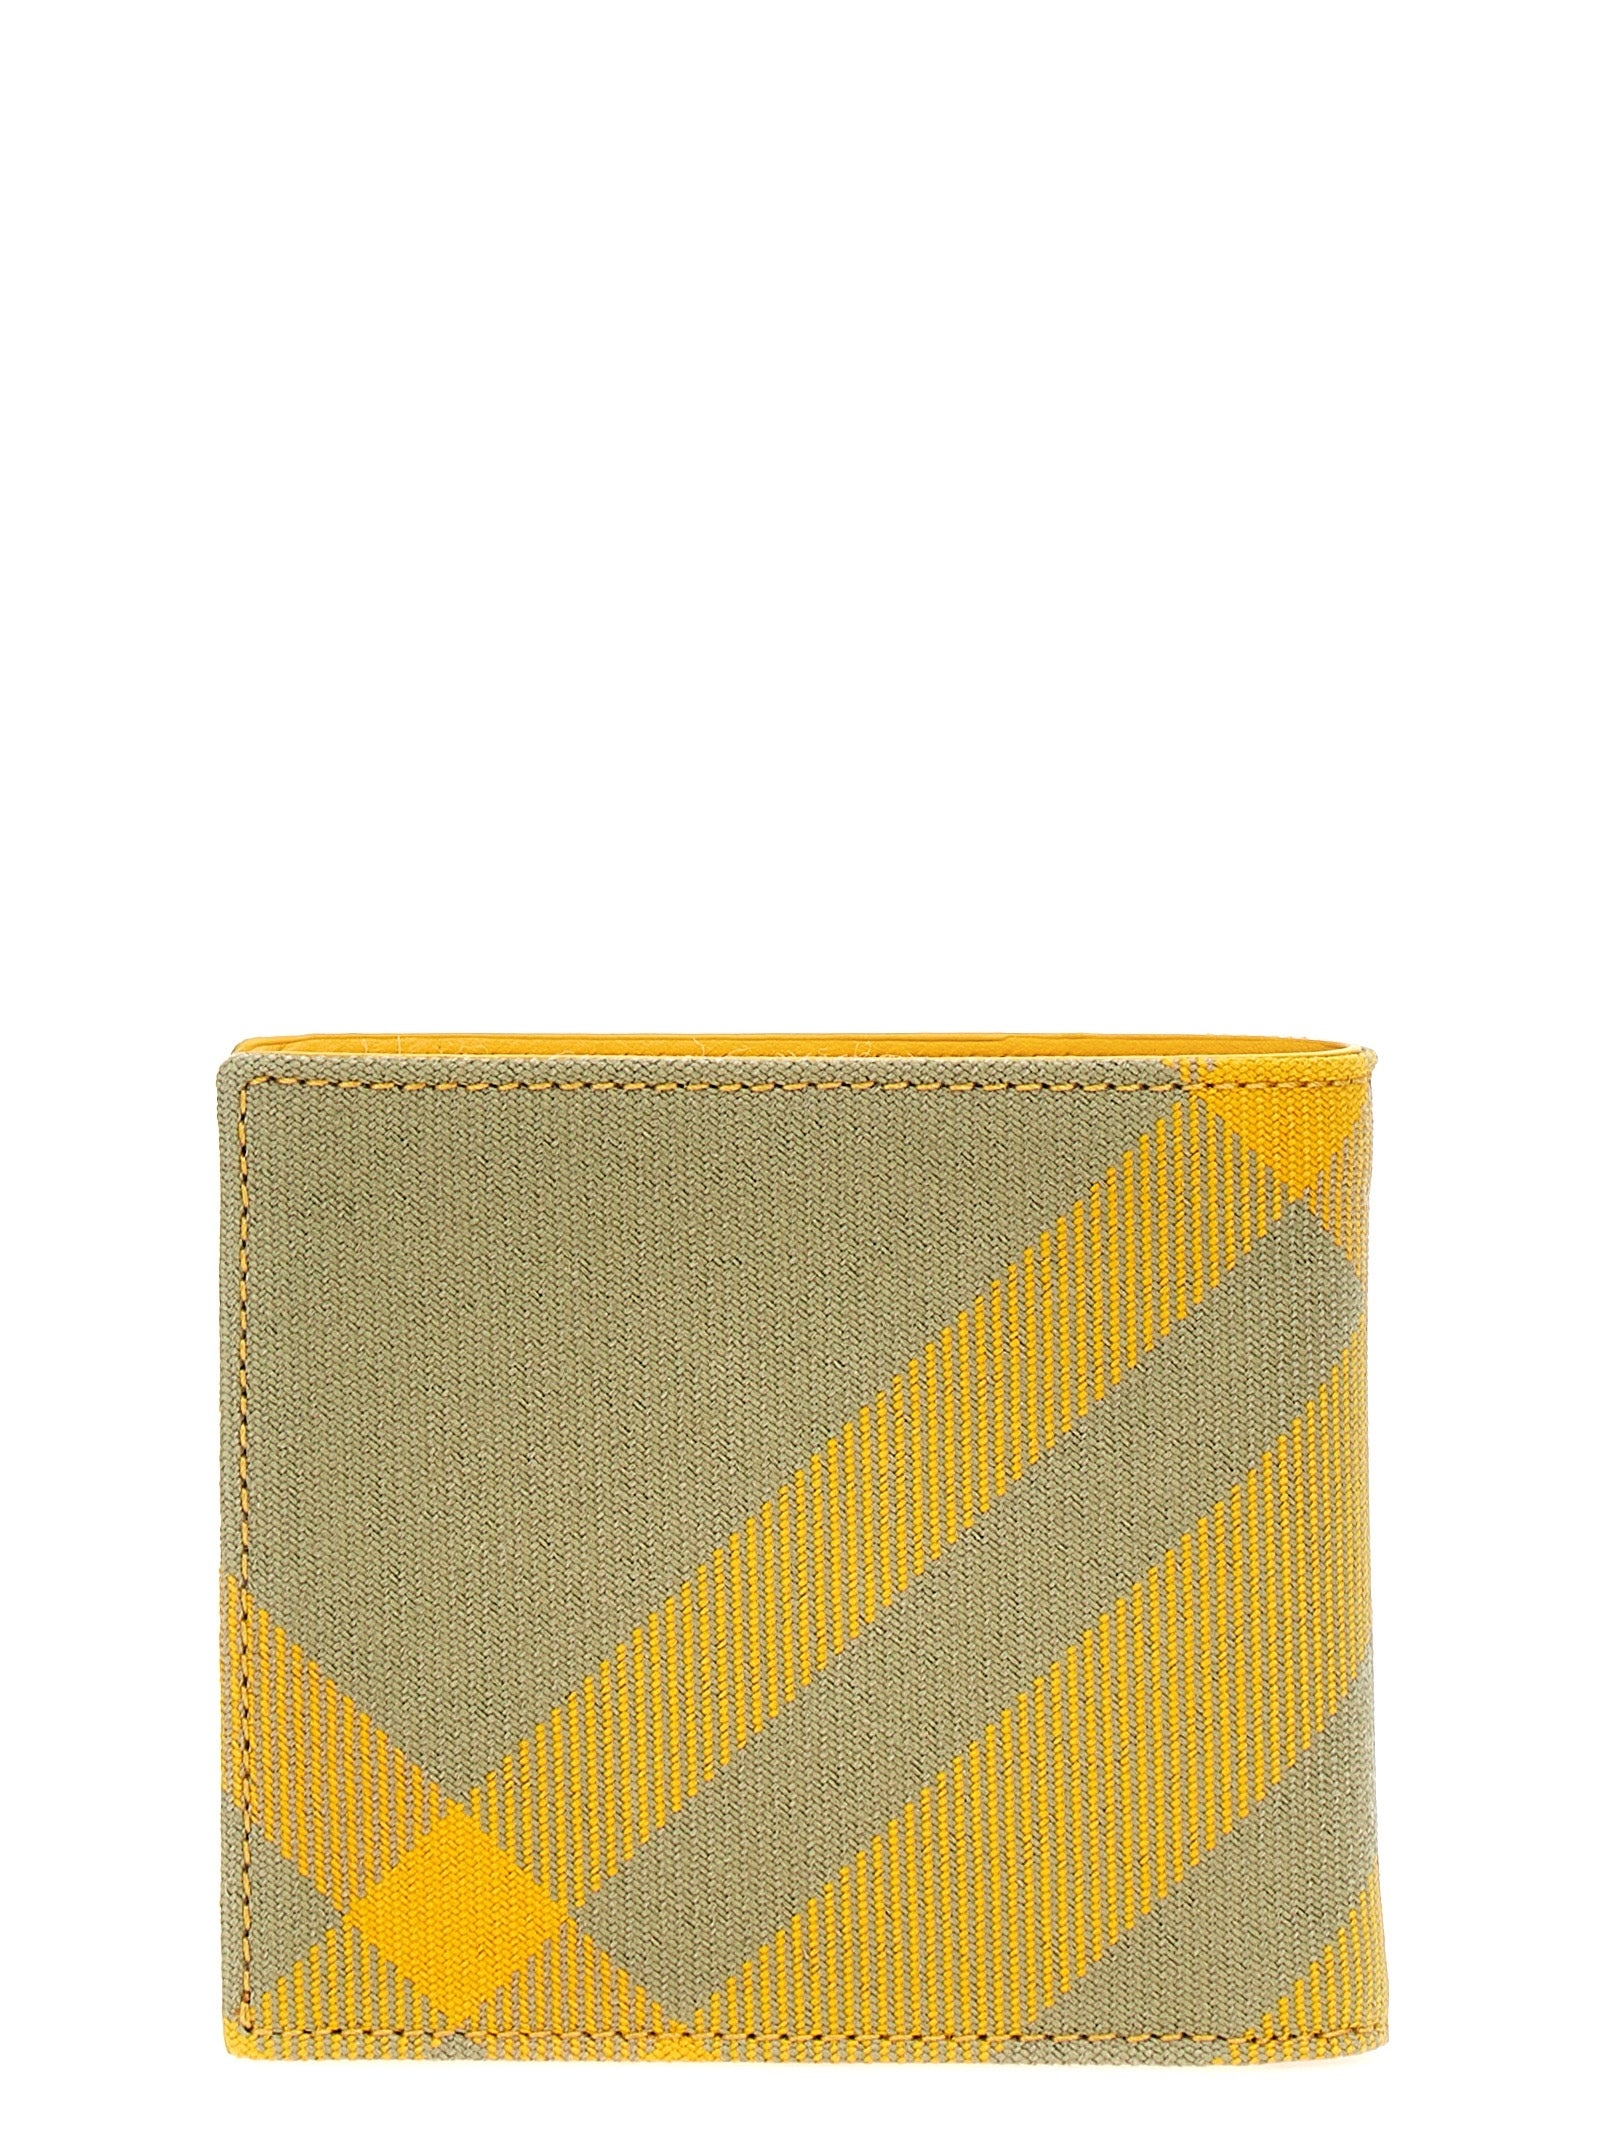 Burberry Check Wallet - 2